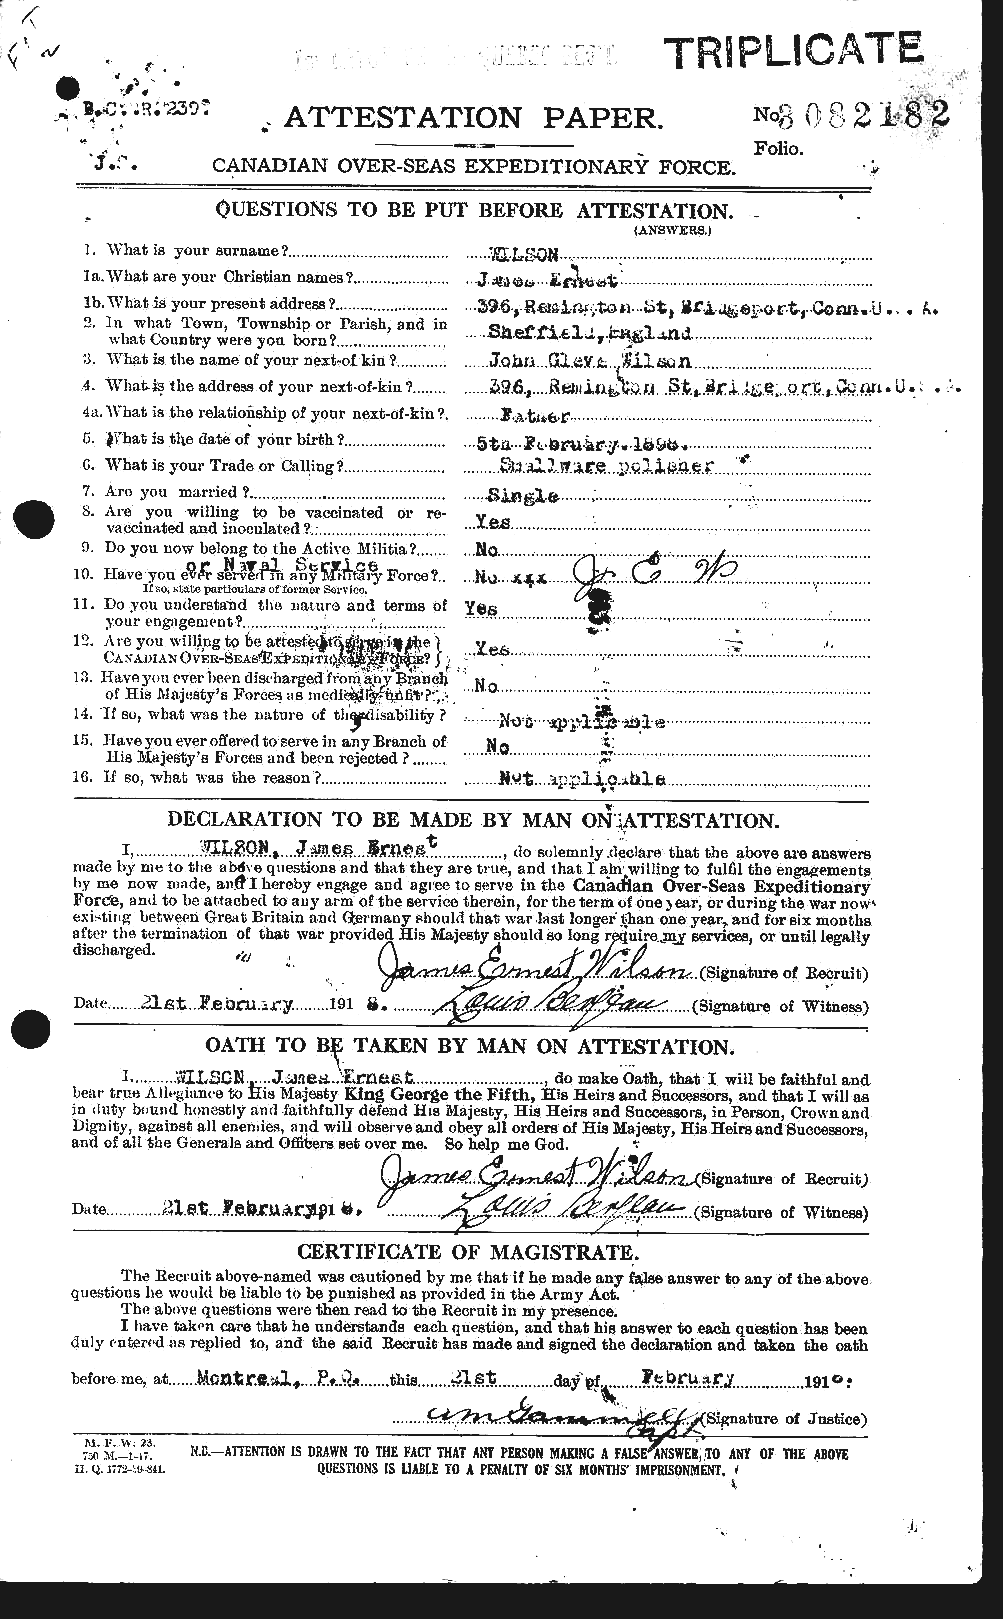 Personnel Records of the First World War - CEF 681448a